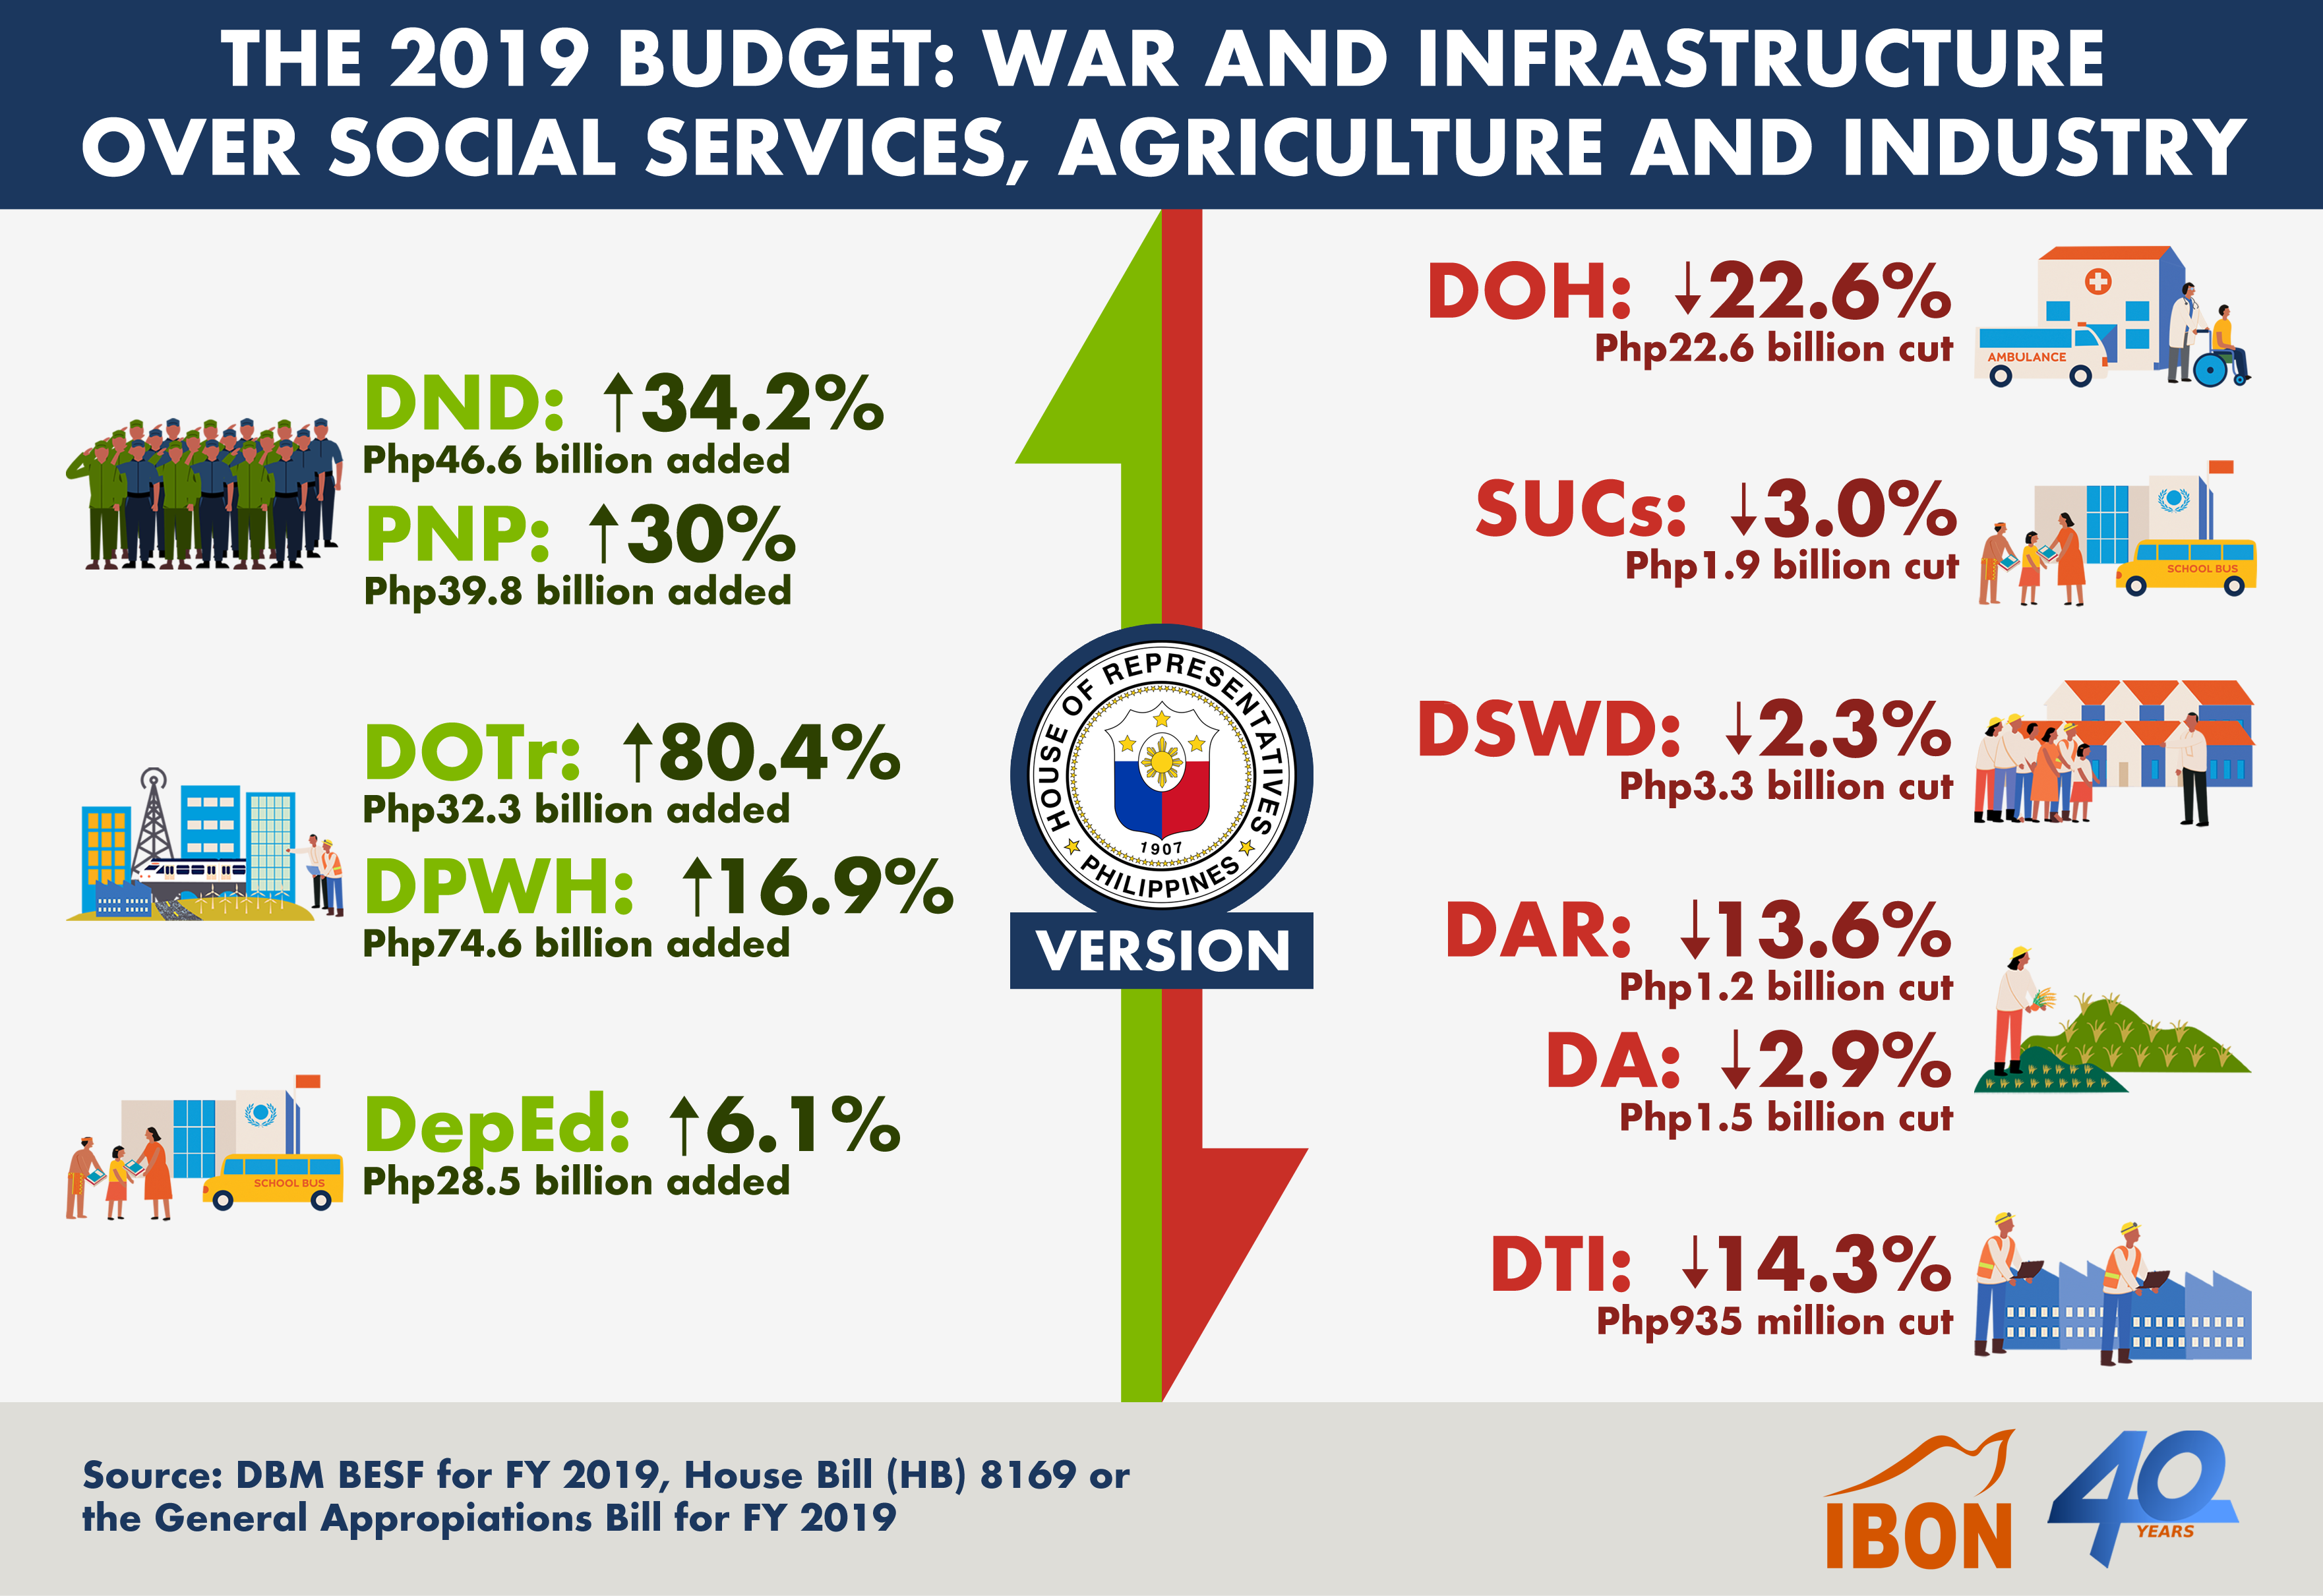 20192601 The 2019 Budget - HOR Version